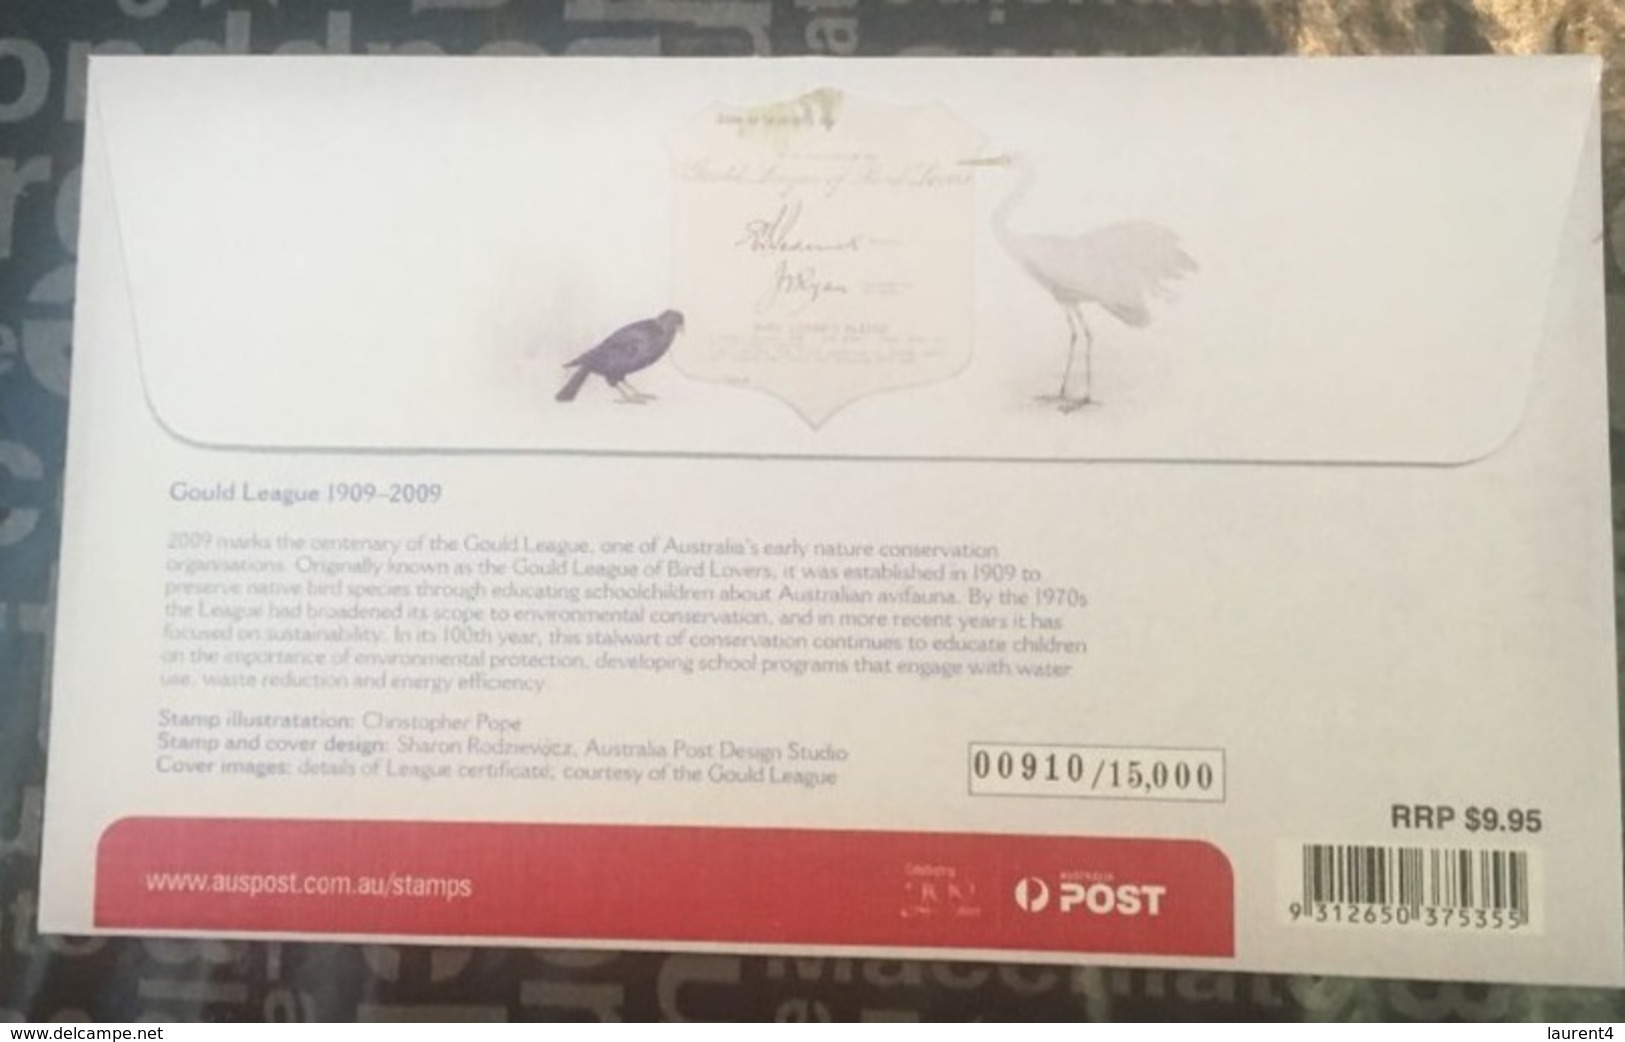 (Special - 4-8-2020) Australia - 2009 - Gould League Of Bird Lovers  - Australia Special Cover (RRP $ 9.95) Nº 00910 - Mechanical Postmarks (Advertisement)